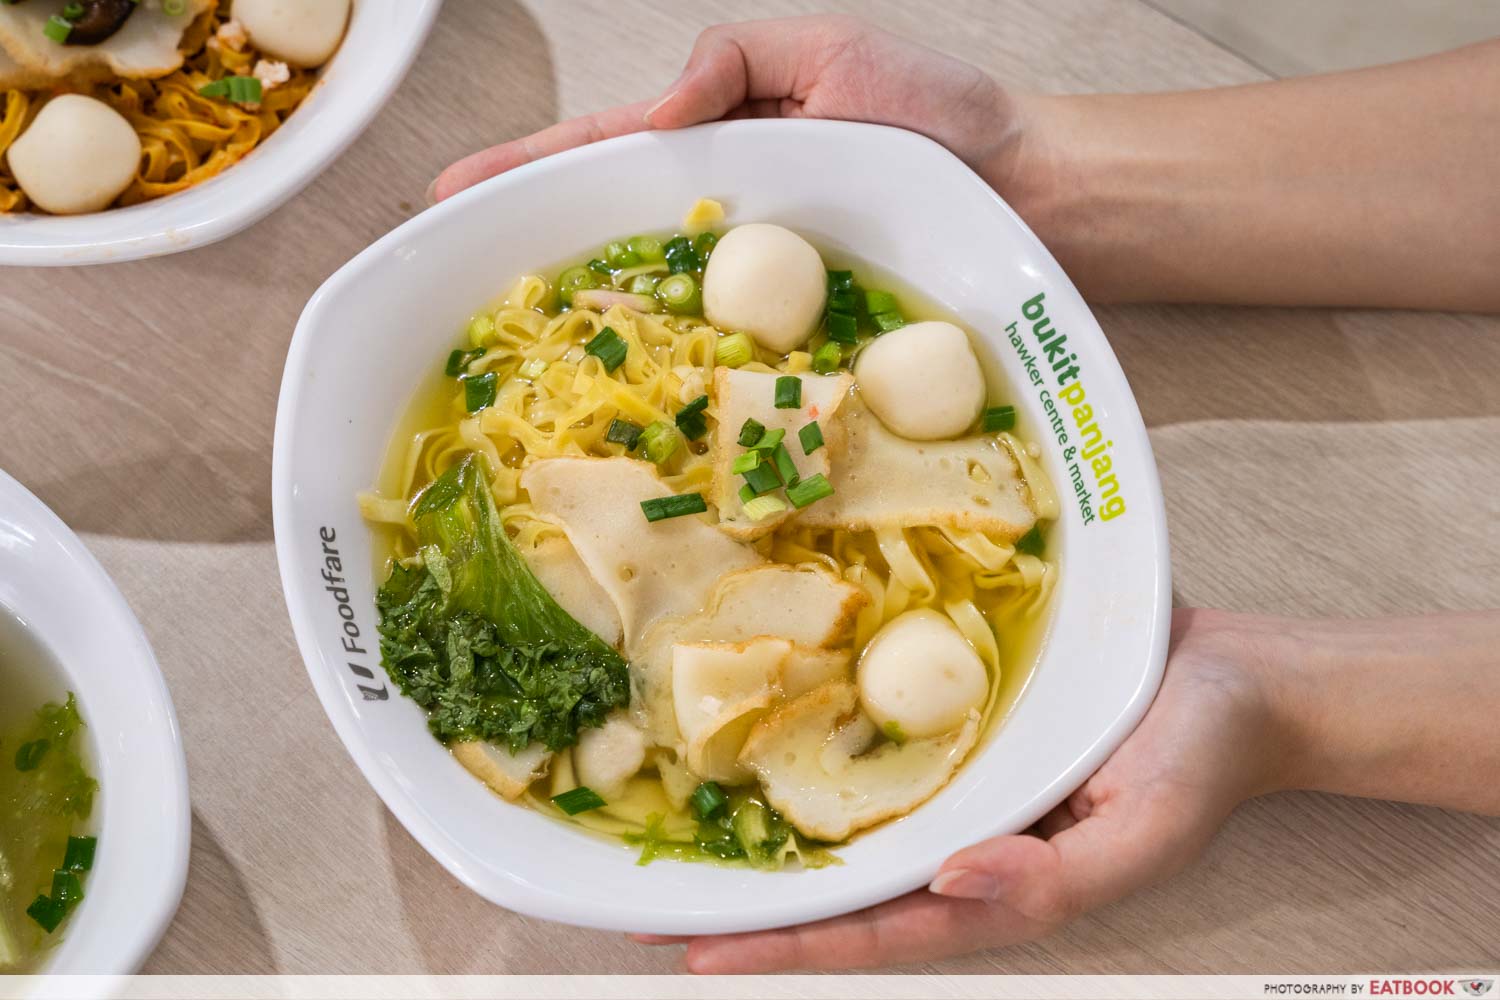 You-Xiang-Teochew-Noodles-fishball noodle